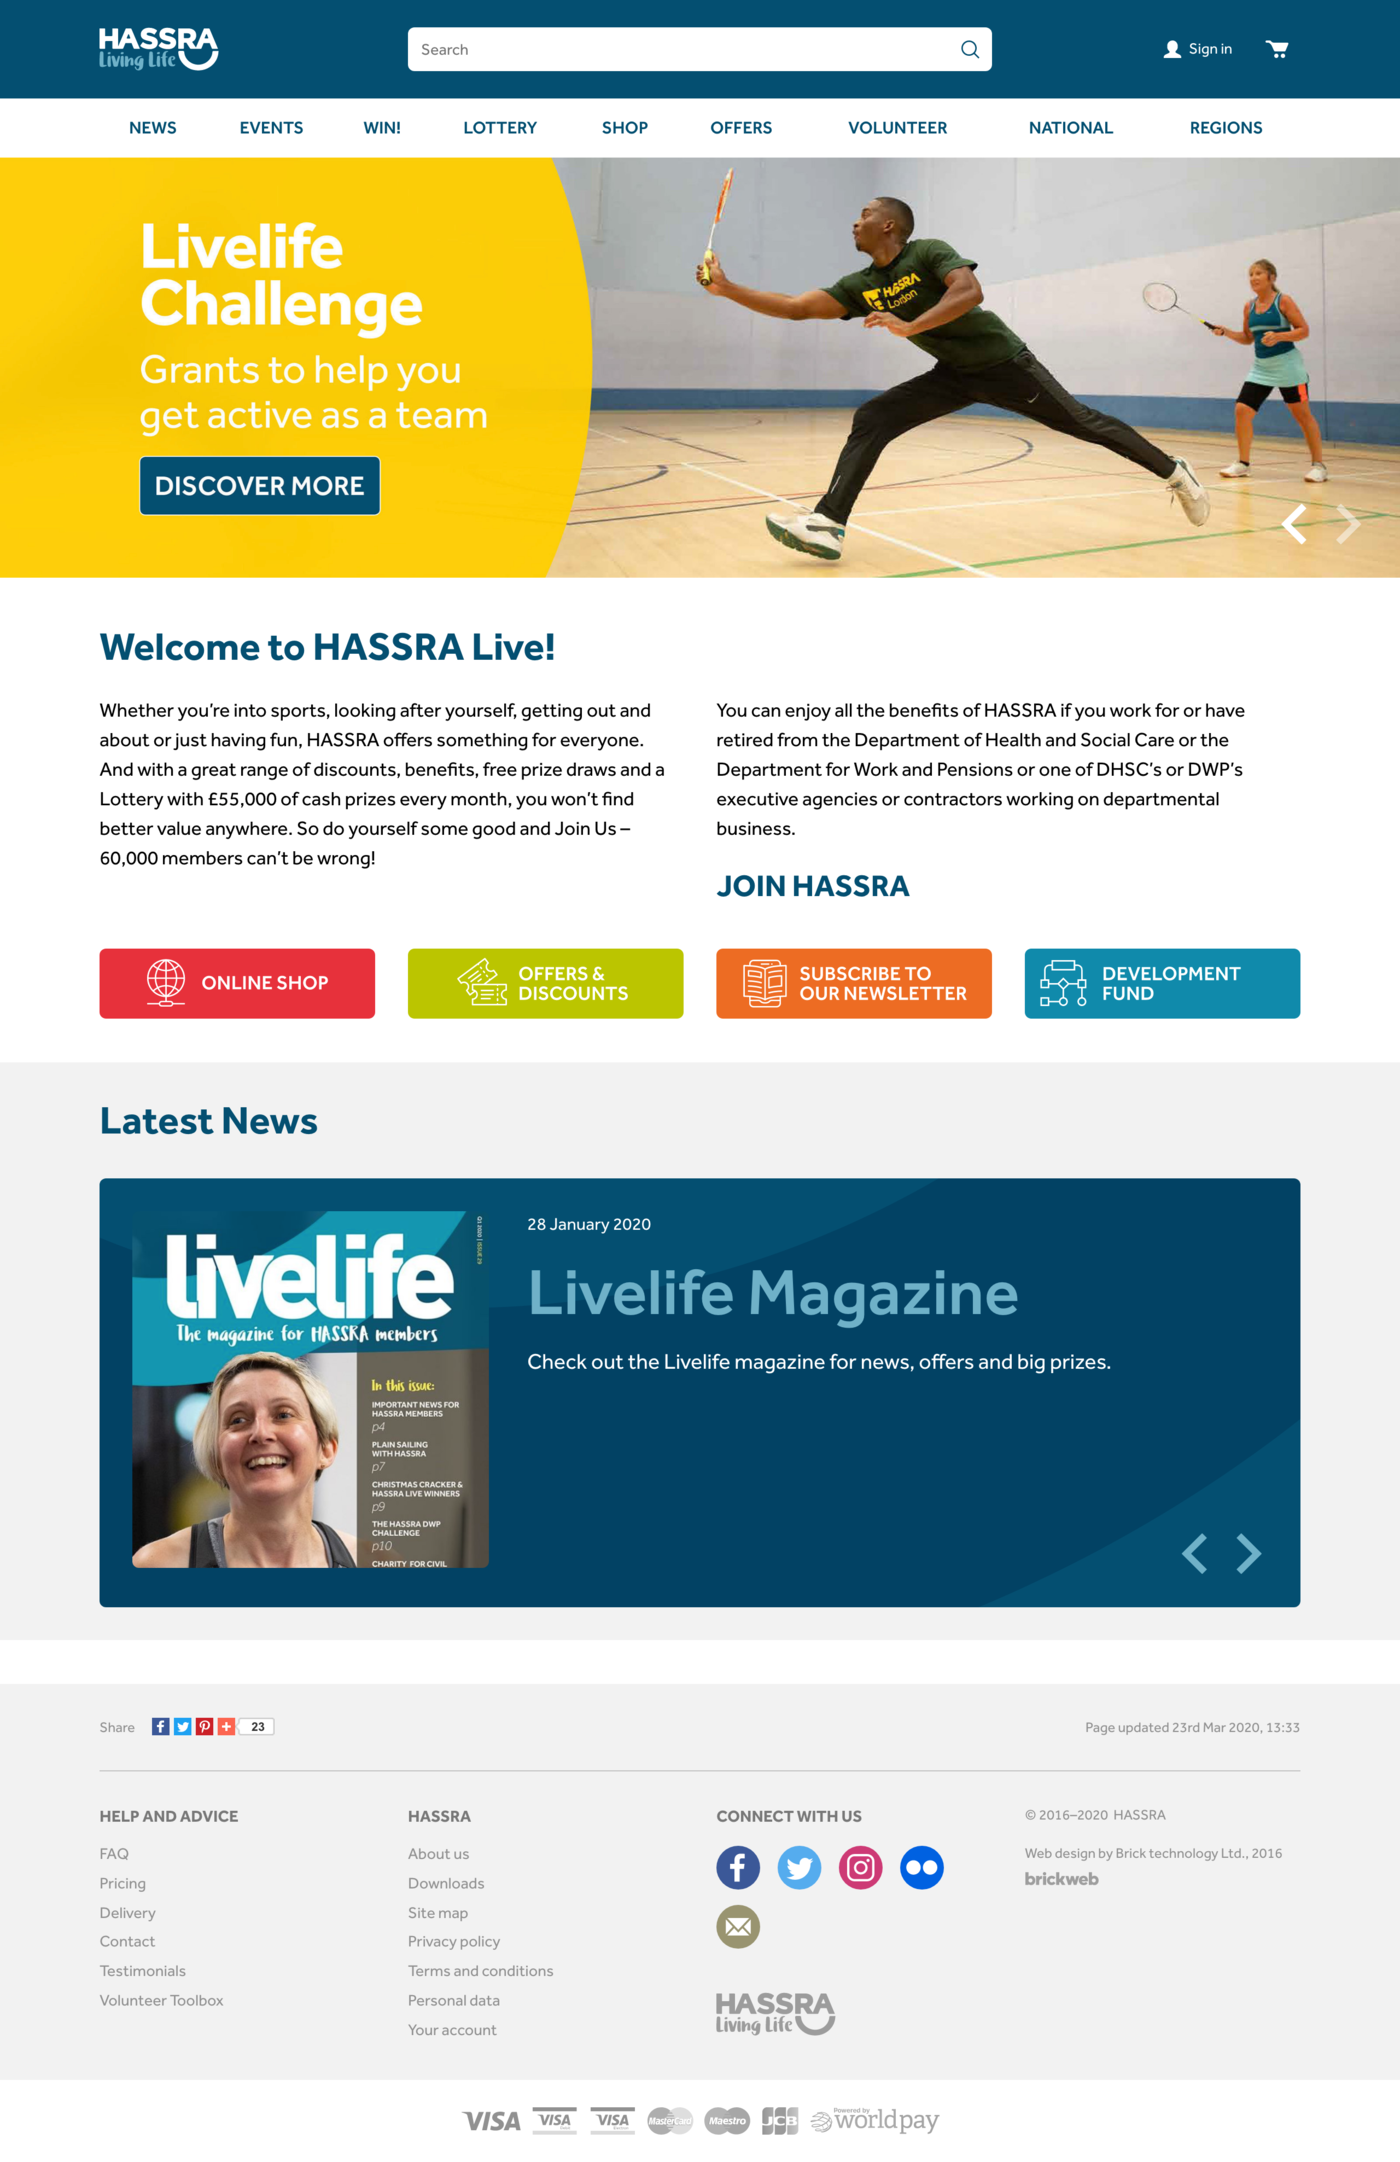 HASSRA Live Home page